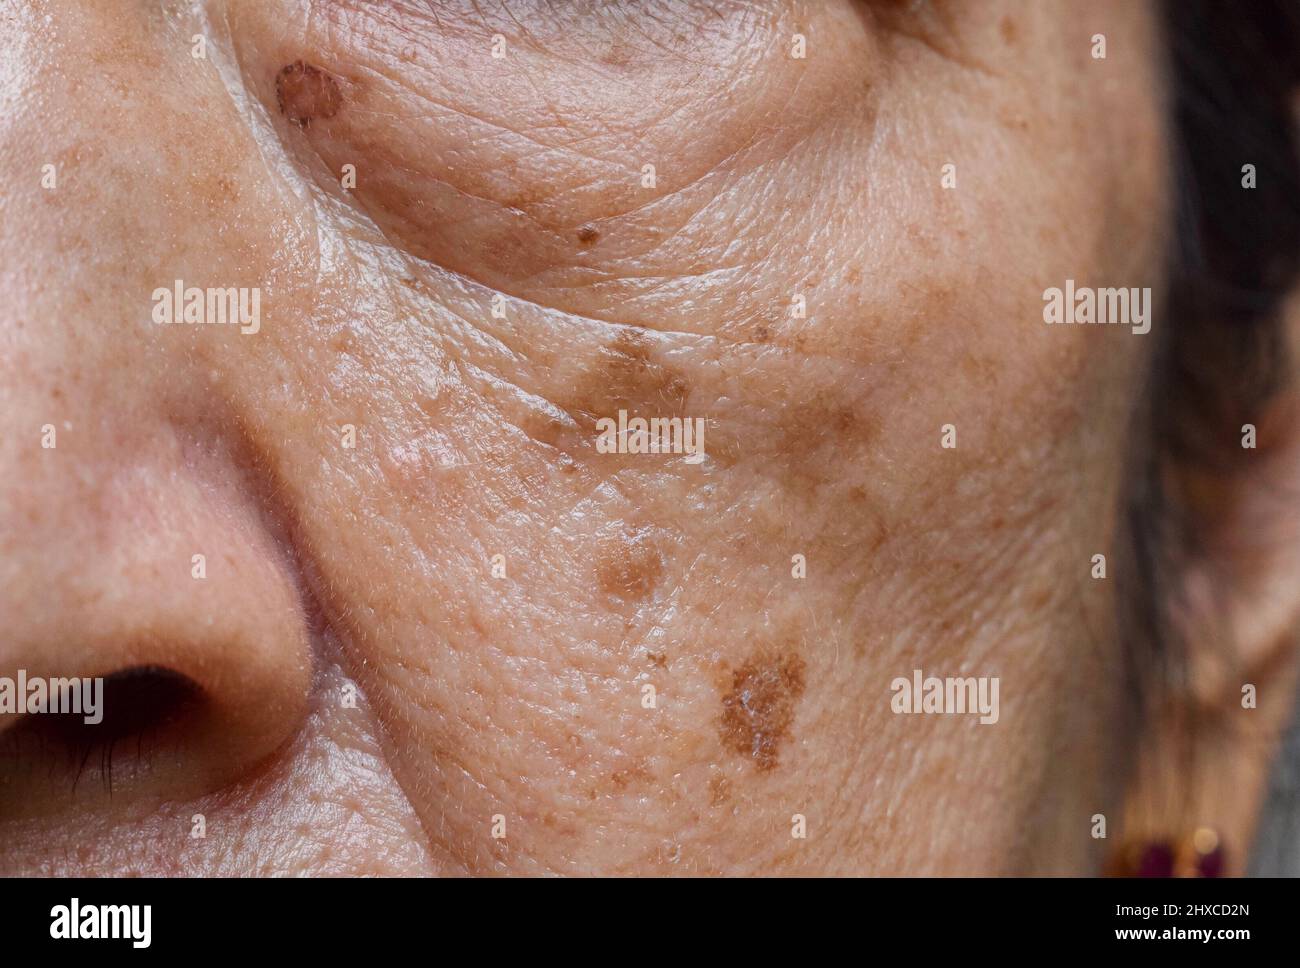 Small brown patches called age spots on face of Asian elder woman. They are also called liver spots, senile lentigo, or sun spots. Closeup view. Stock Photo